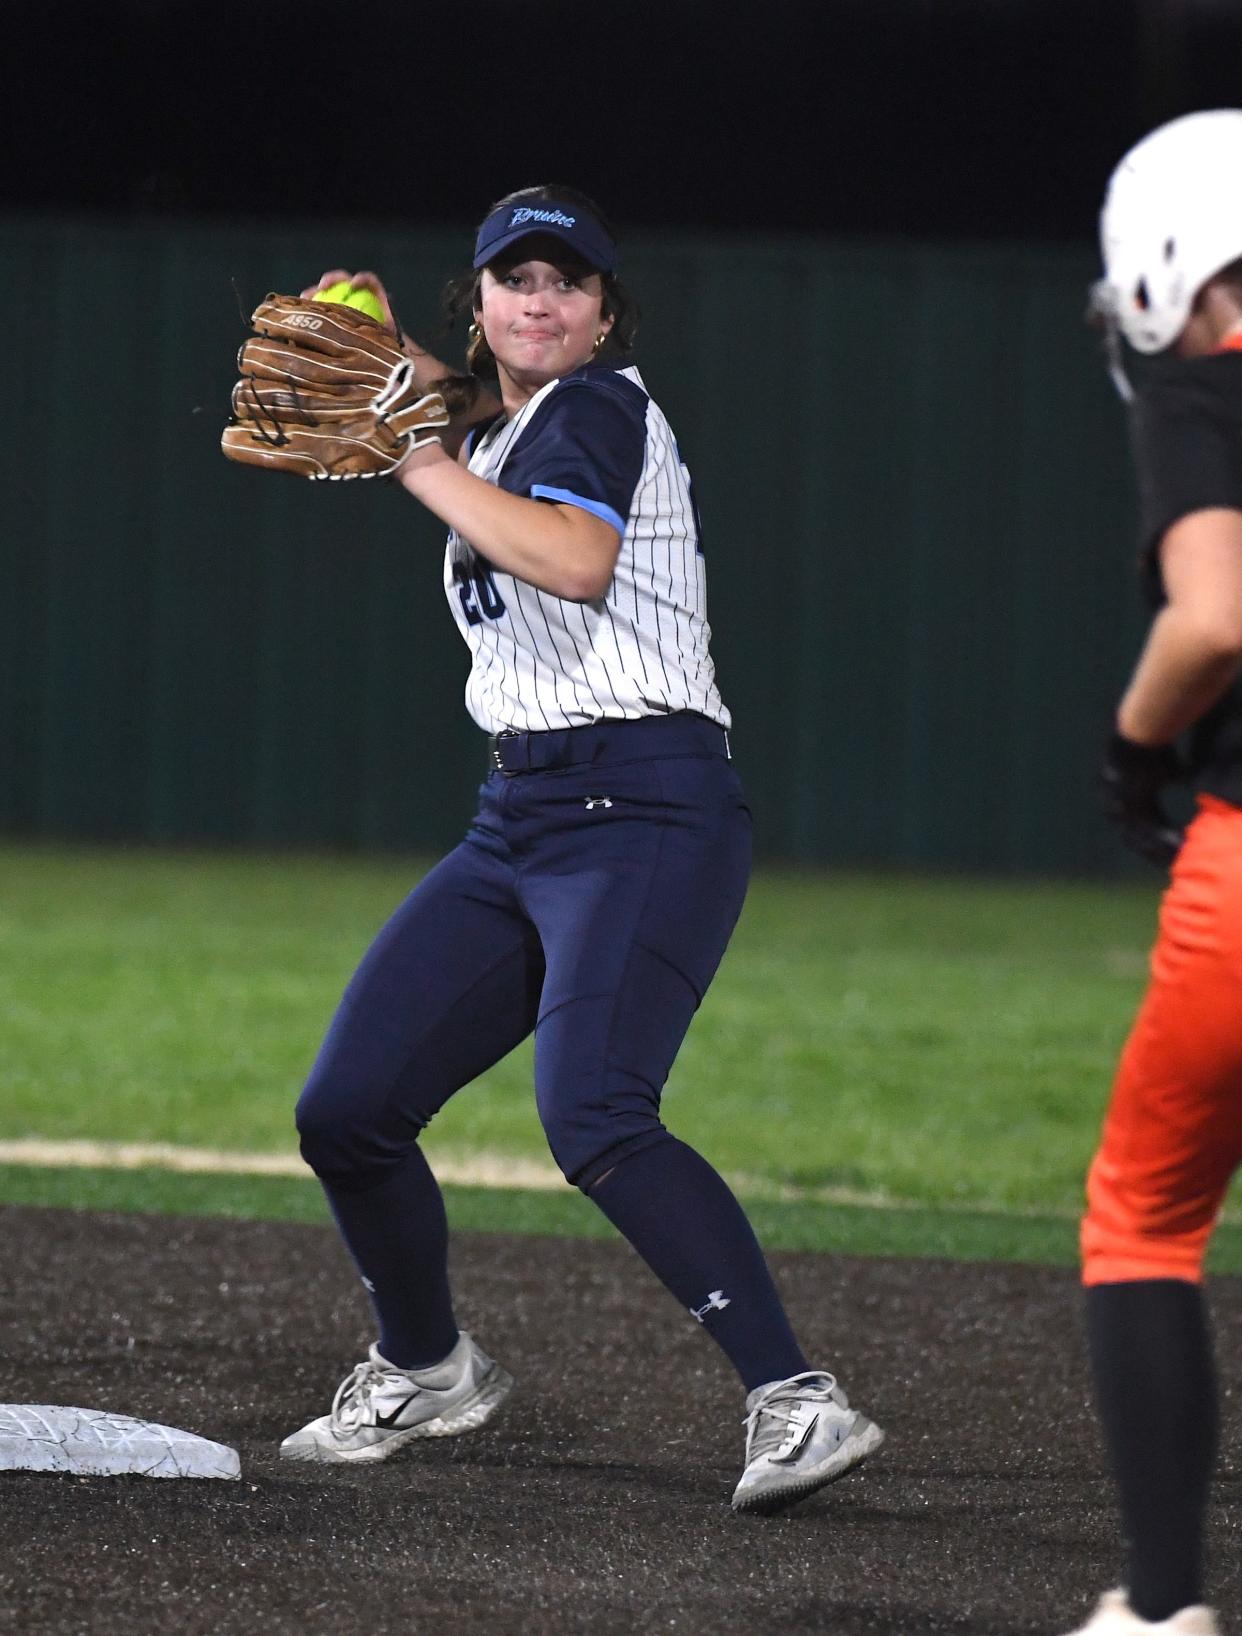 Bartlesville High School's Lola Redington (20) looks to turn a double play during slowpitch softball action in Bartlesville earlier in the season.